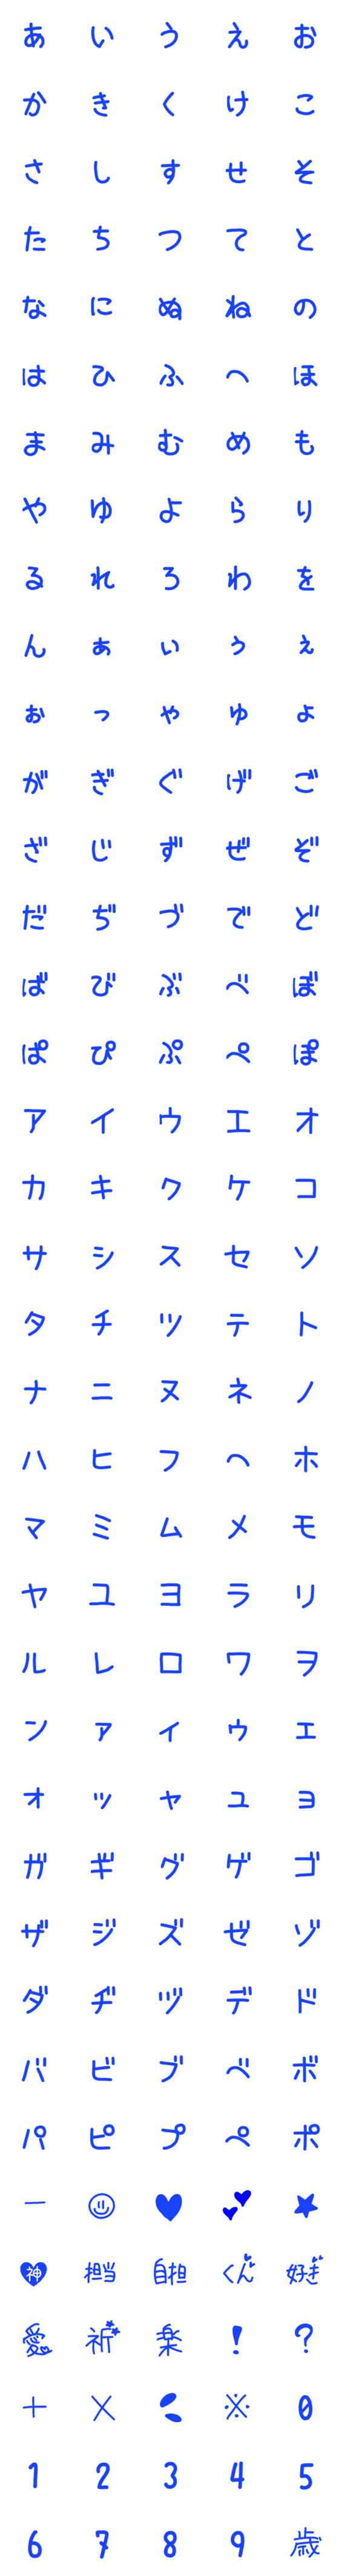 [LINE絵文字]青担当♥︎絵文字の画像一覧